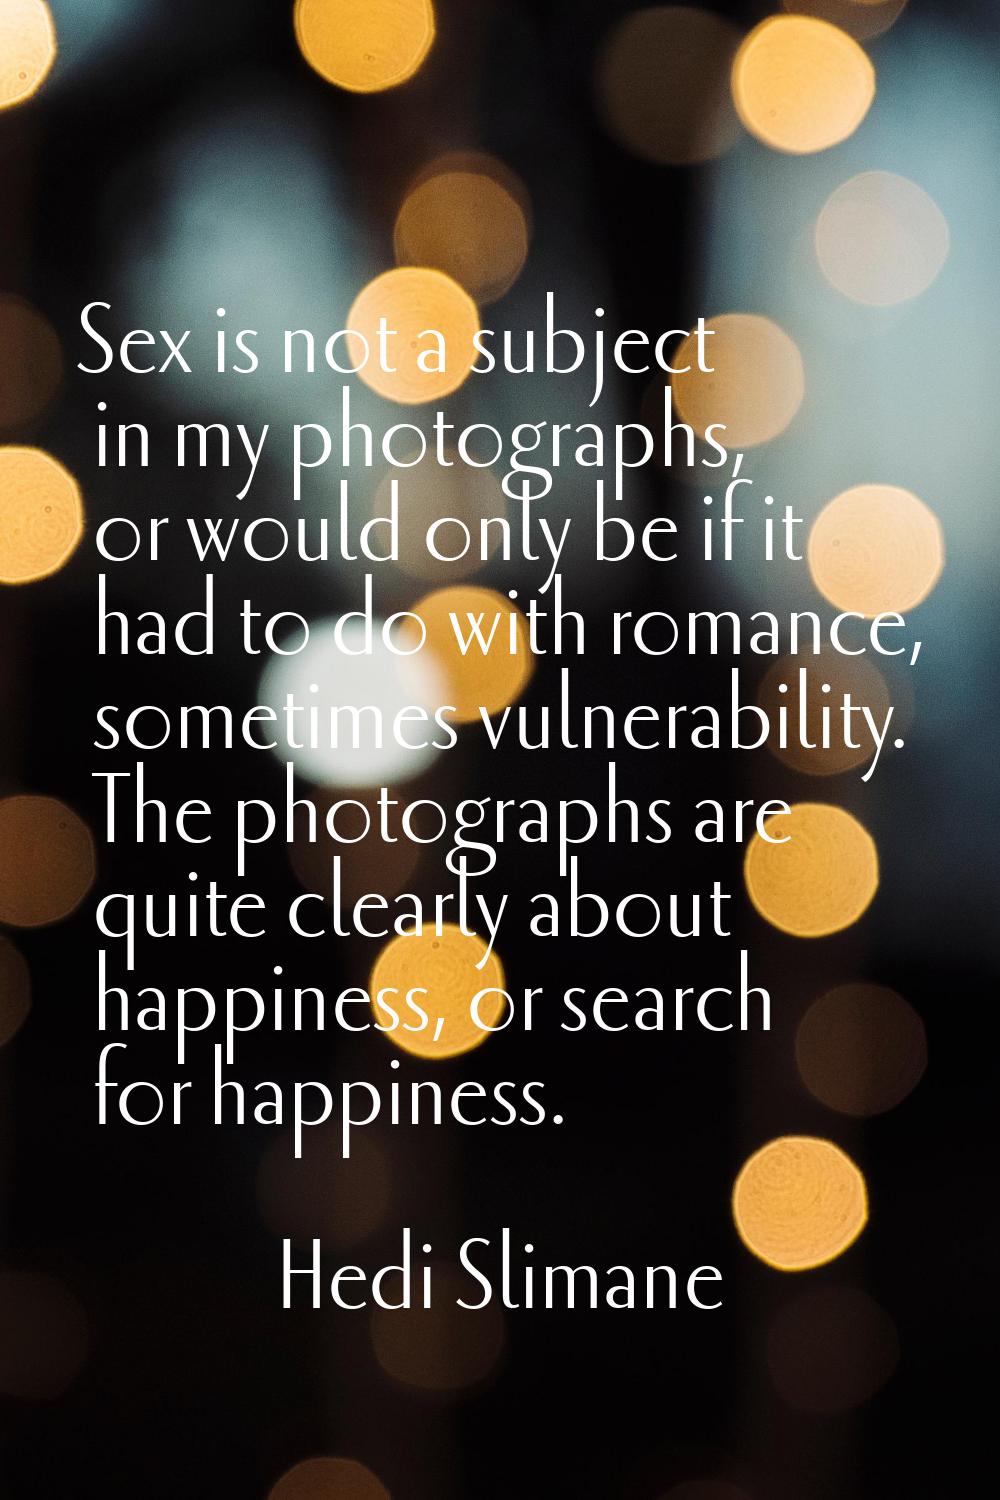 Sex is not a subject in my photographs, or would only be if it had to do with romance, sometimes vu